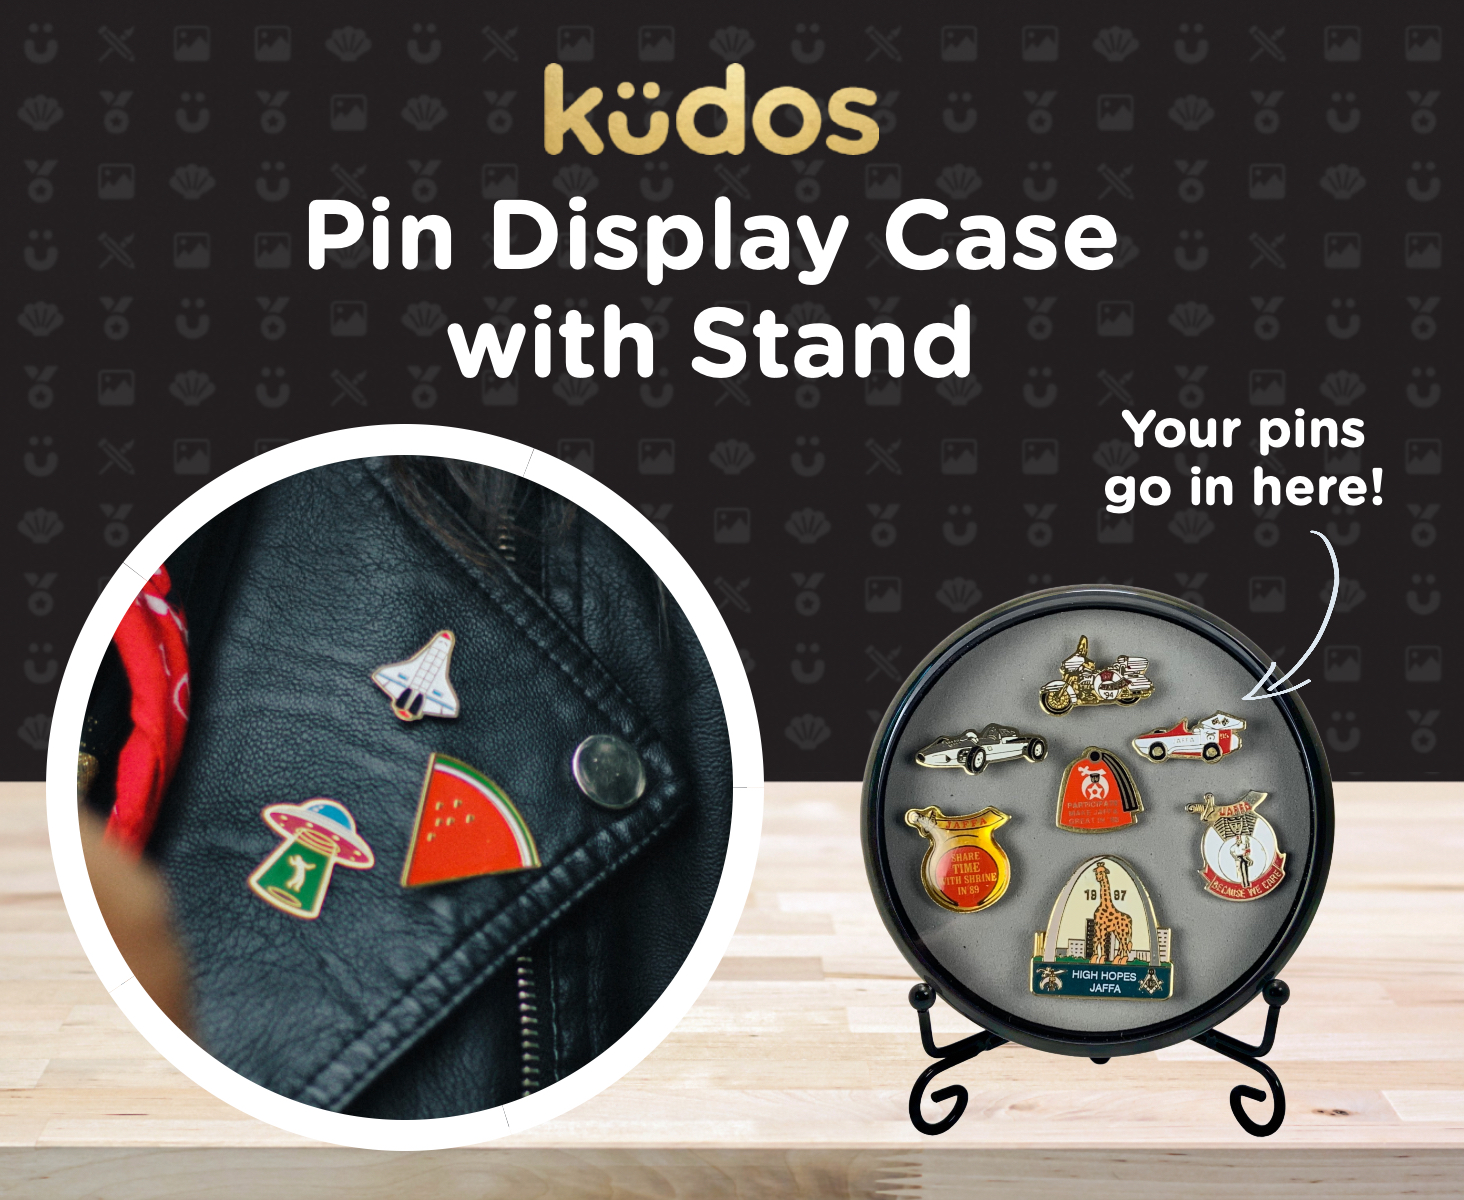 Pin Display Case with Stand, Kudos